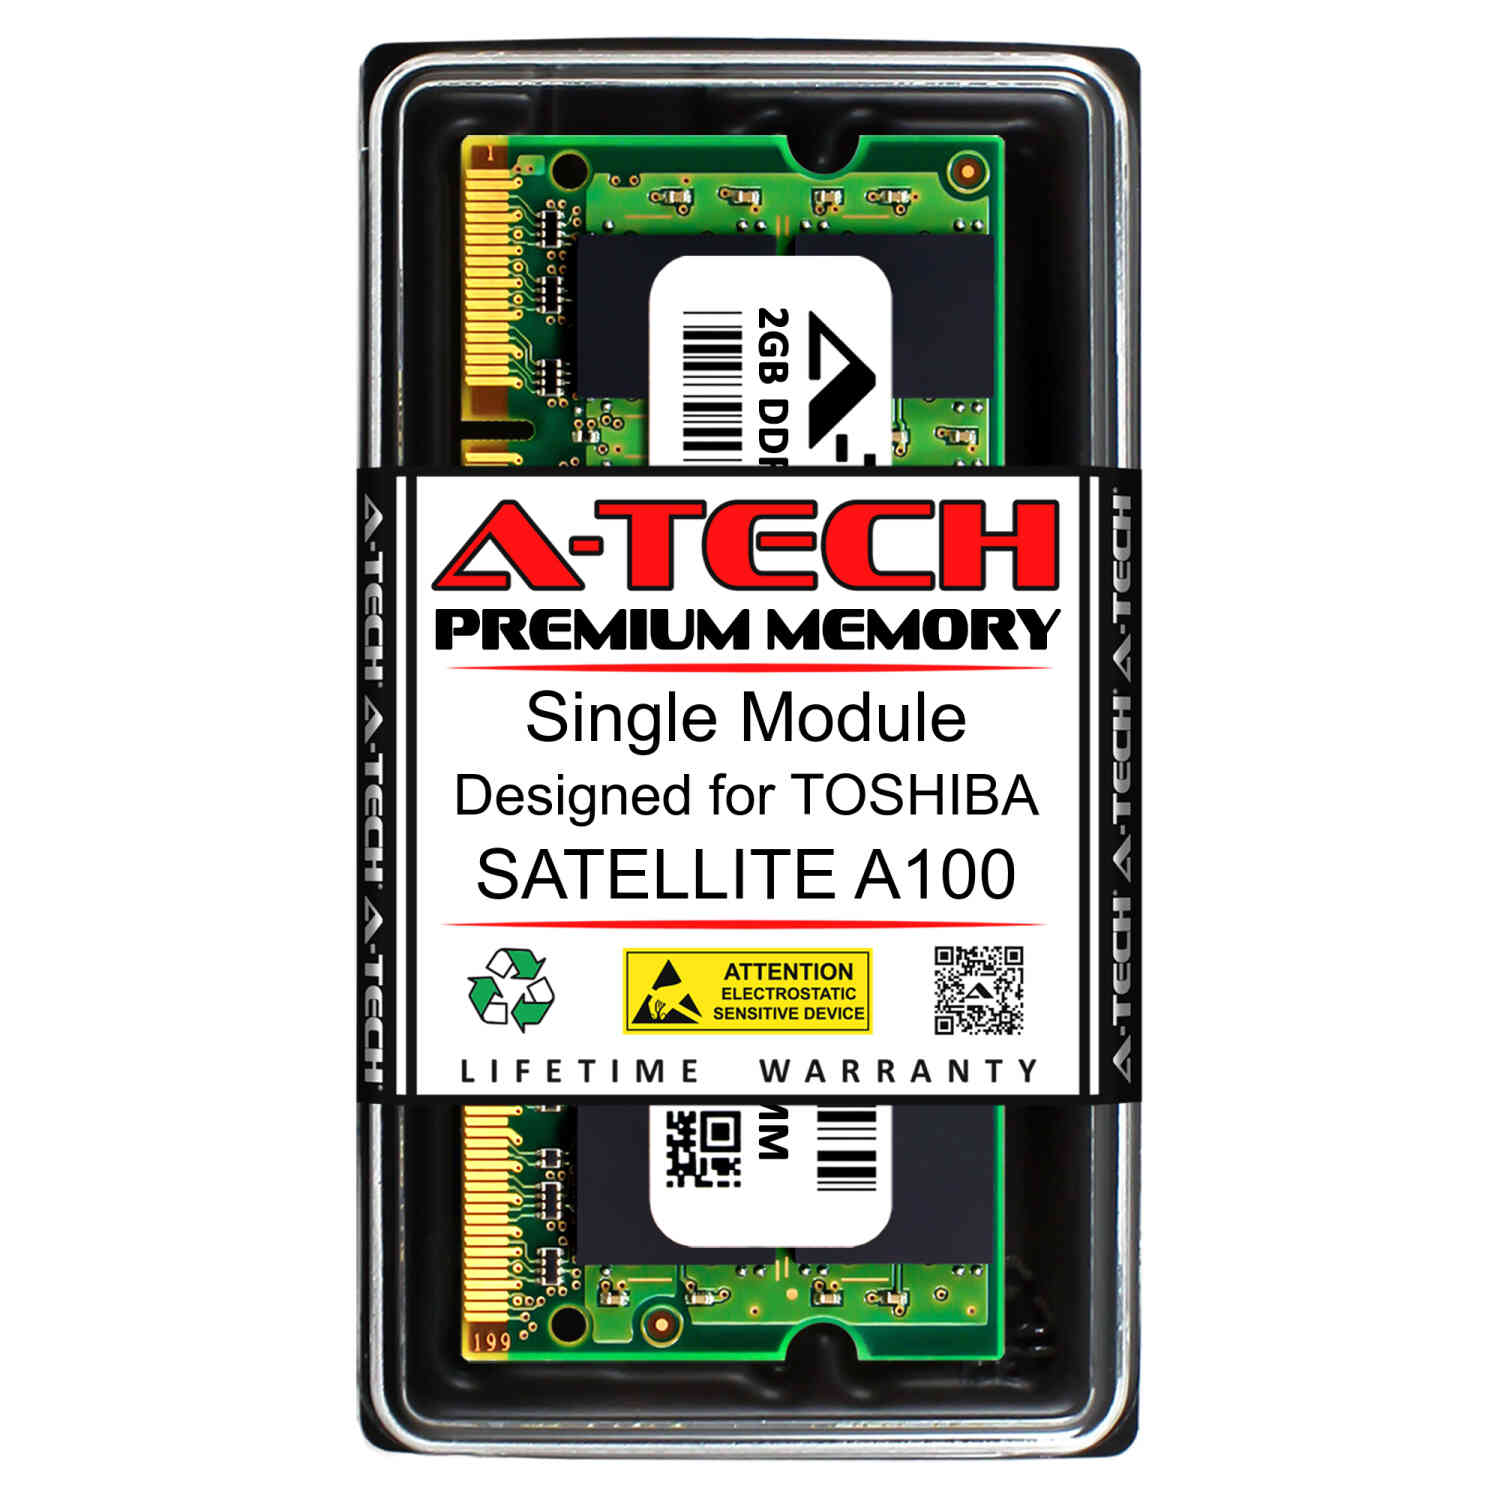 2GB Team High Performance Memory RAM Upgrade Single Stick For Toshiba Satellite U300-NS1 L300/F00 Laptop The Memory Kit comes with Life Time Warranty.